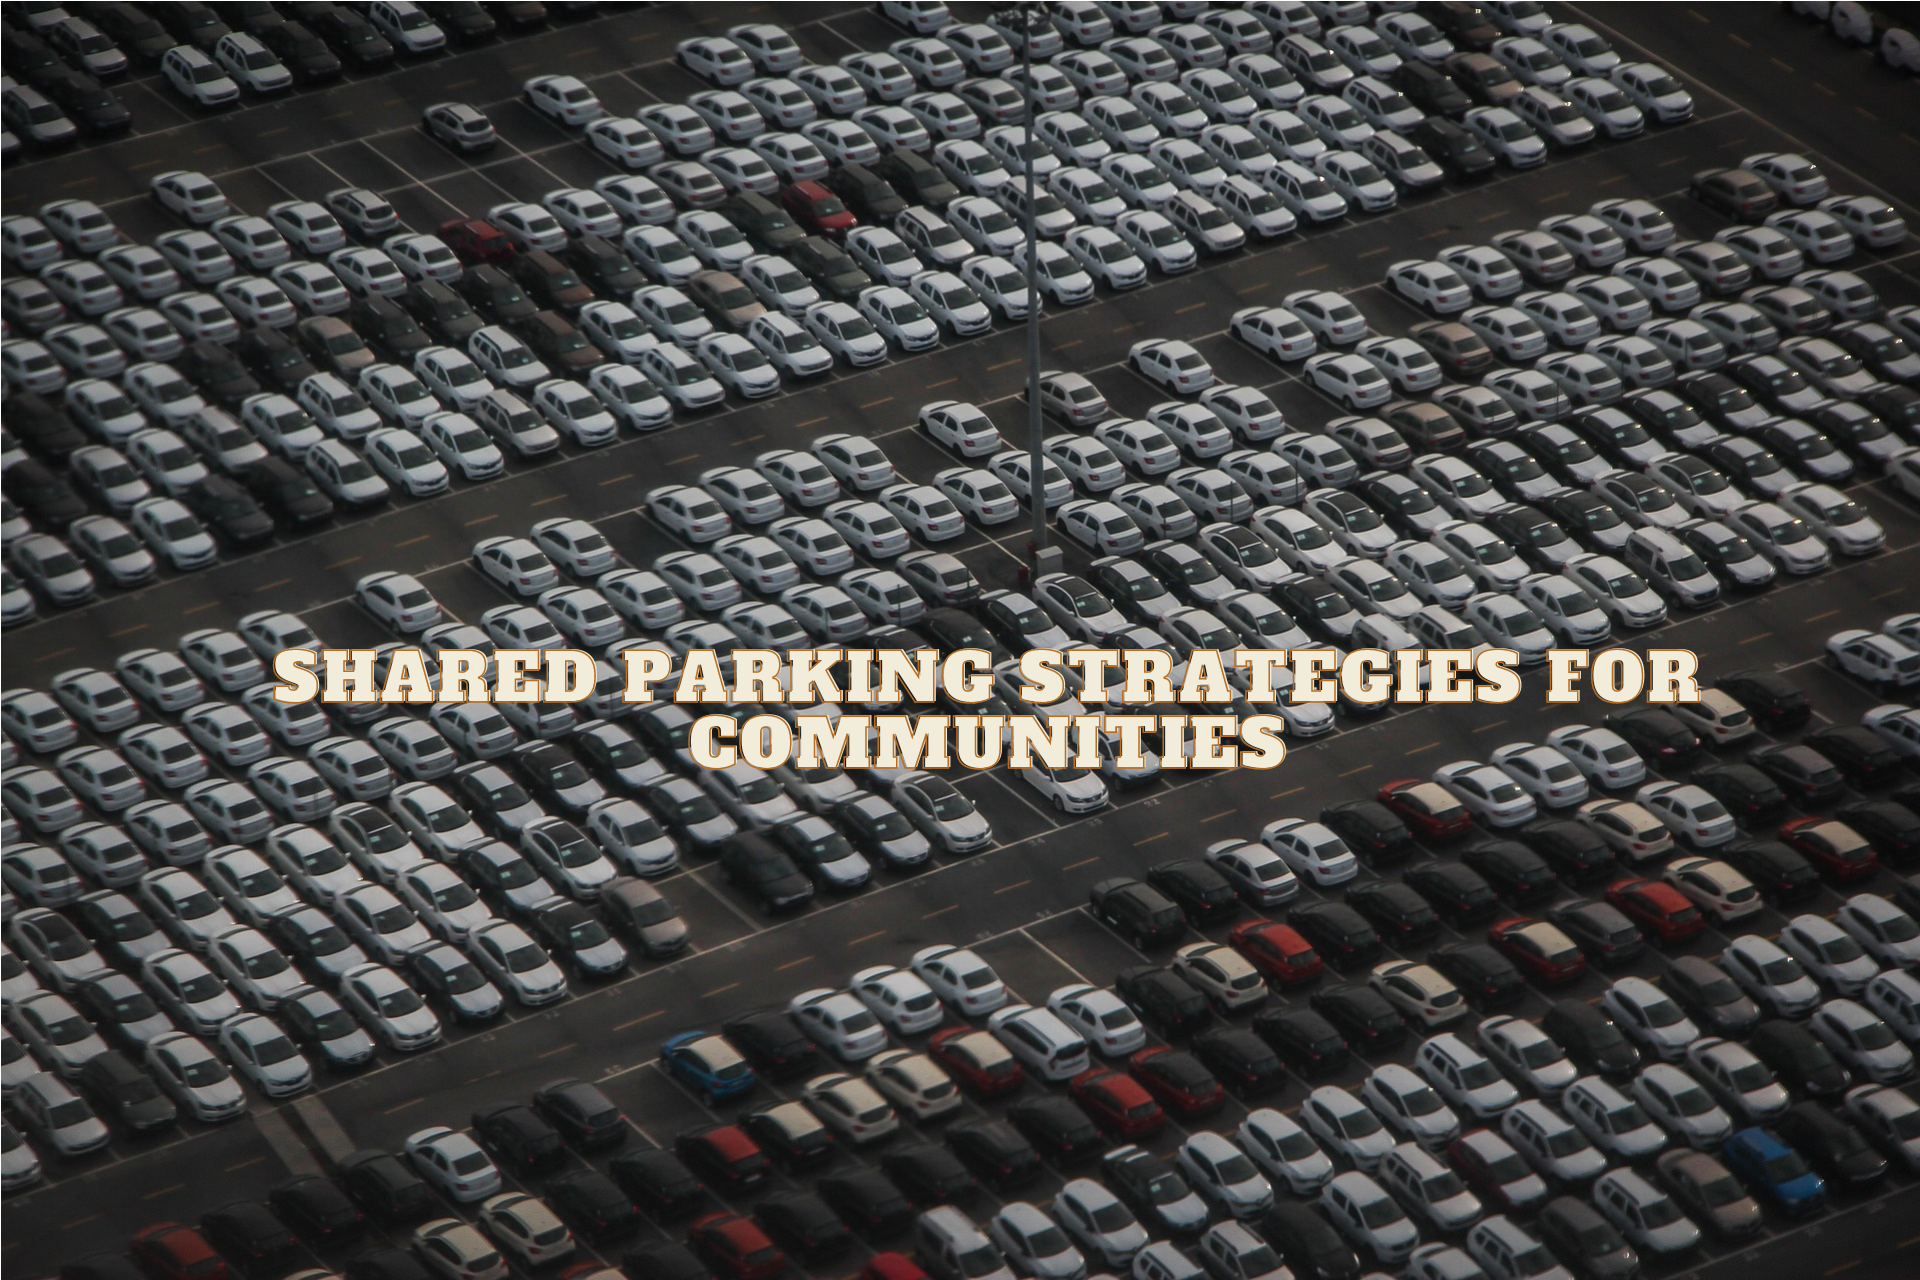 Shared Parking Strategies for Communities